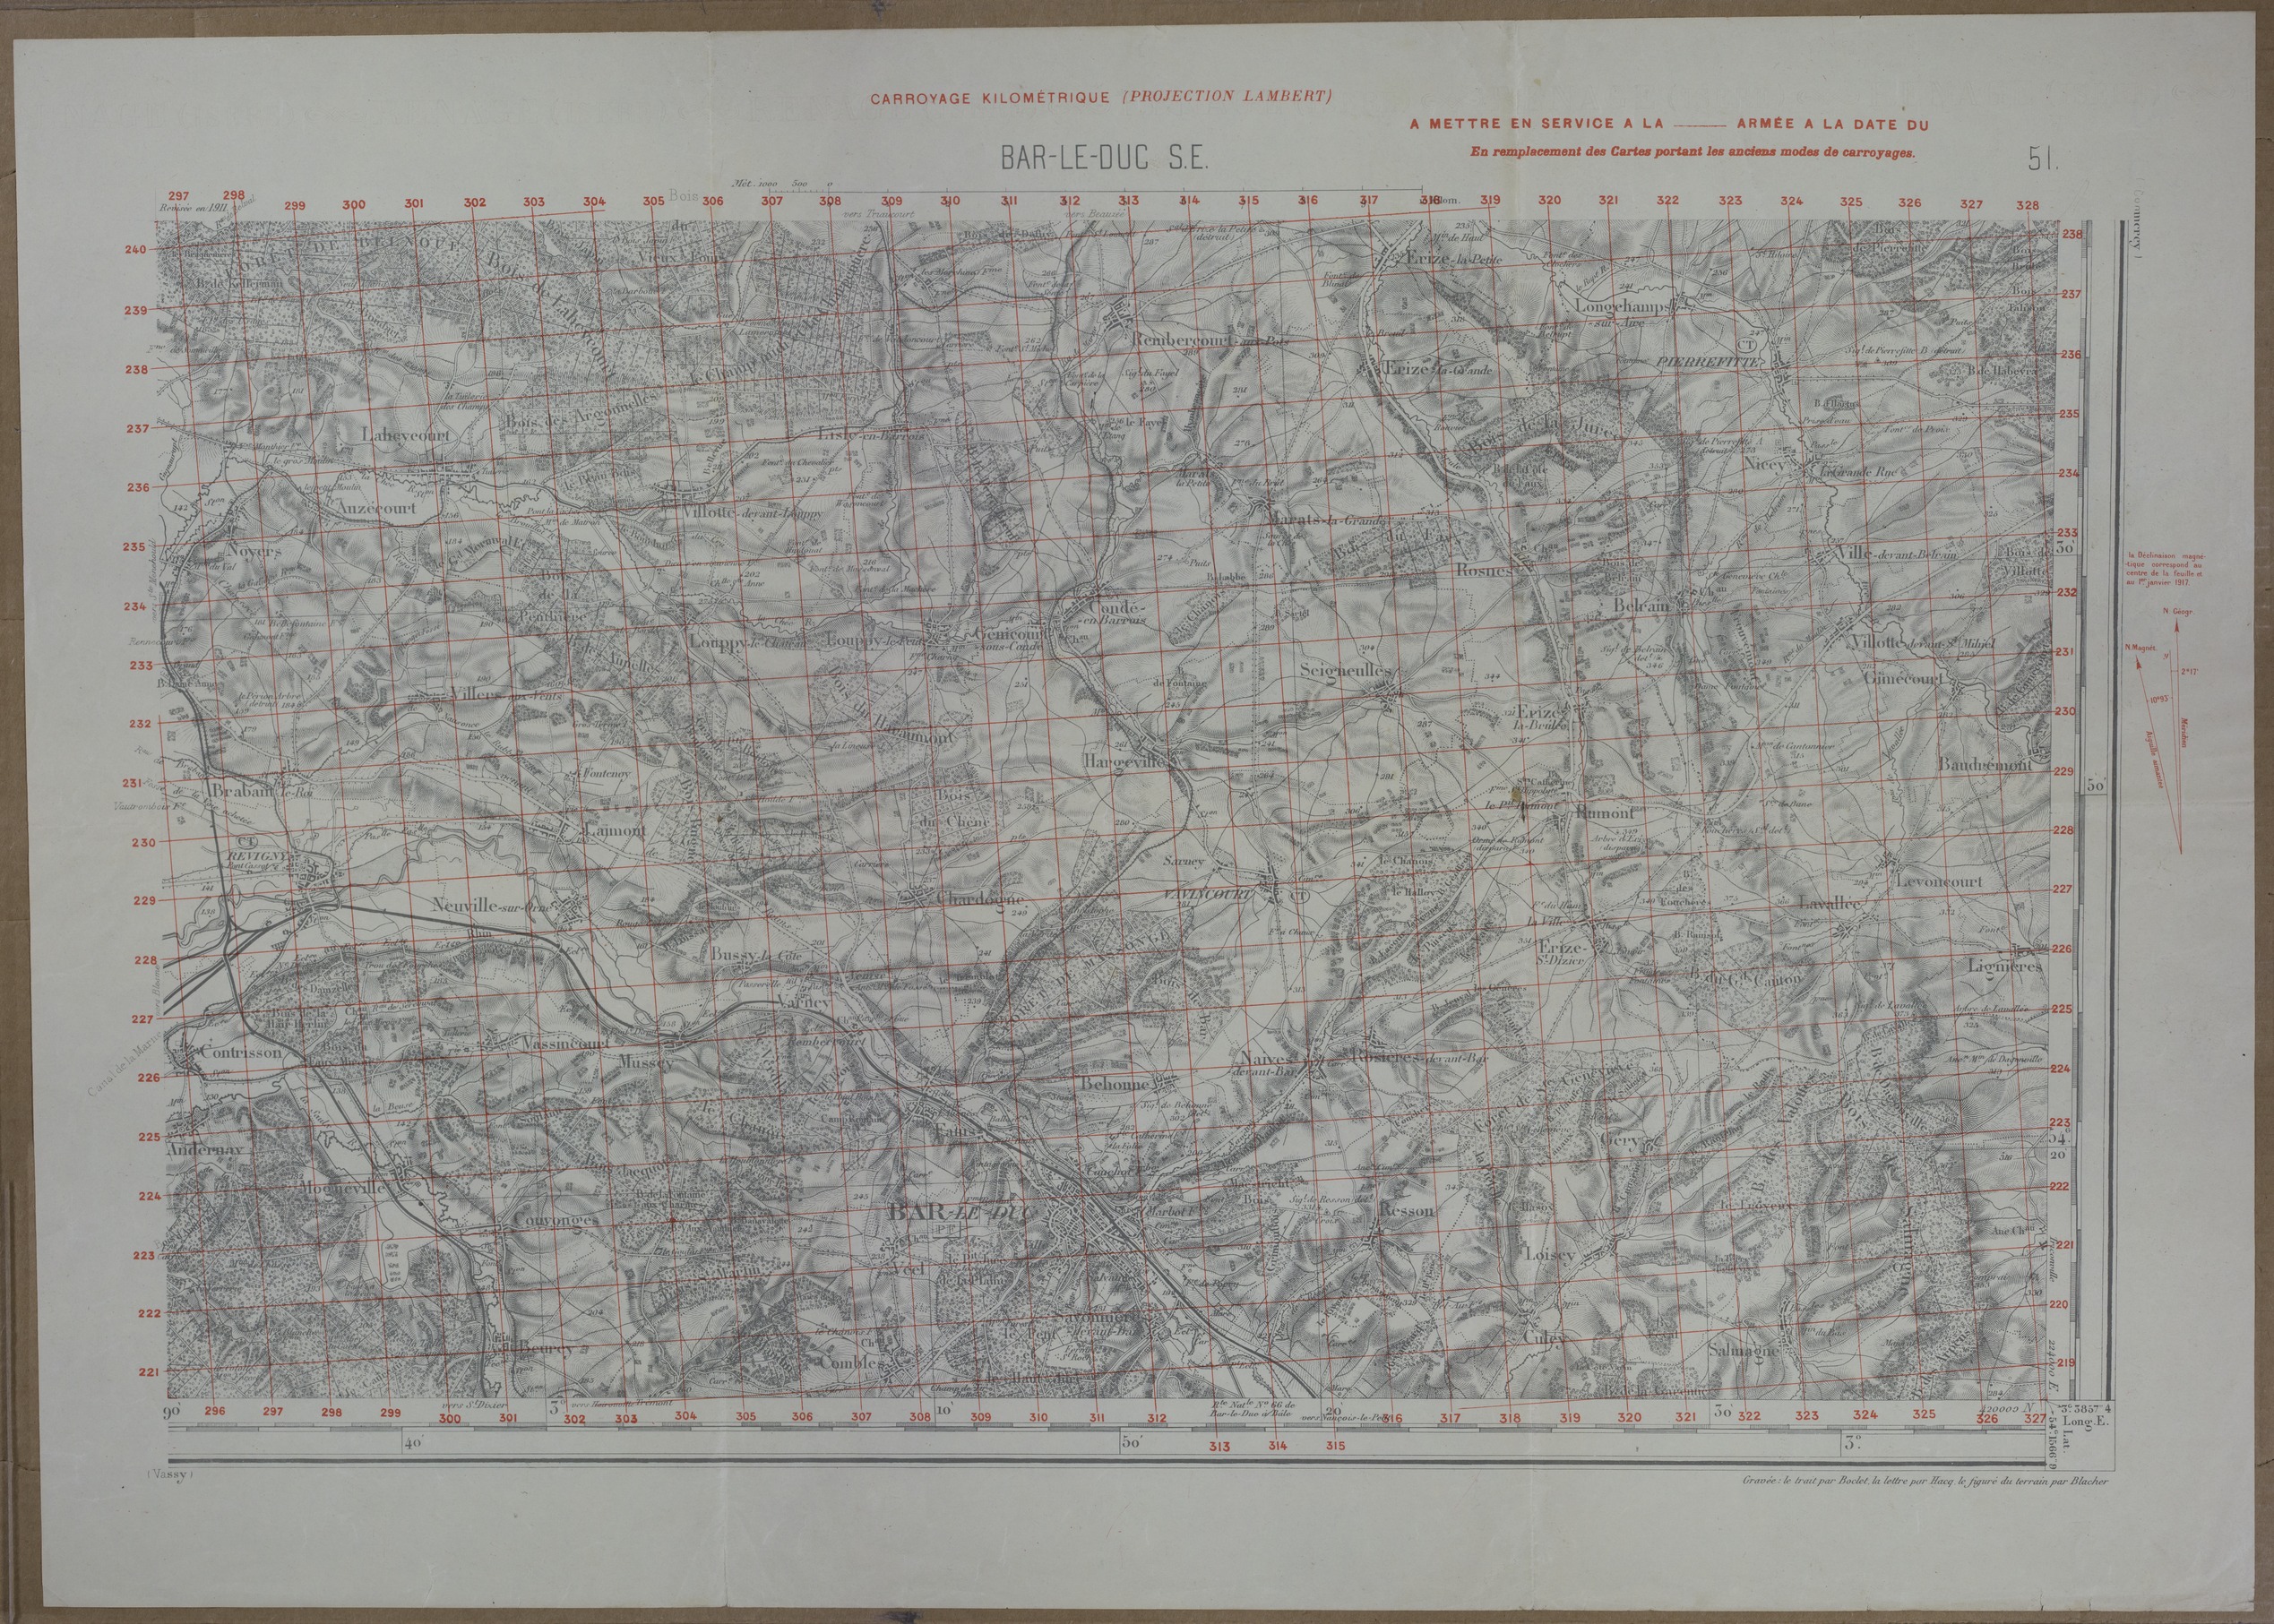 Map of the Battle of the Argonne Forest